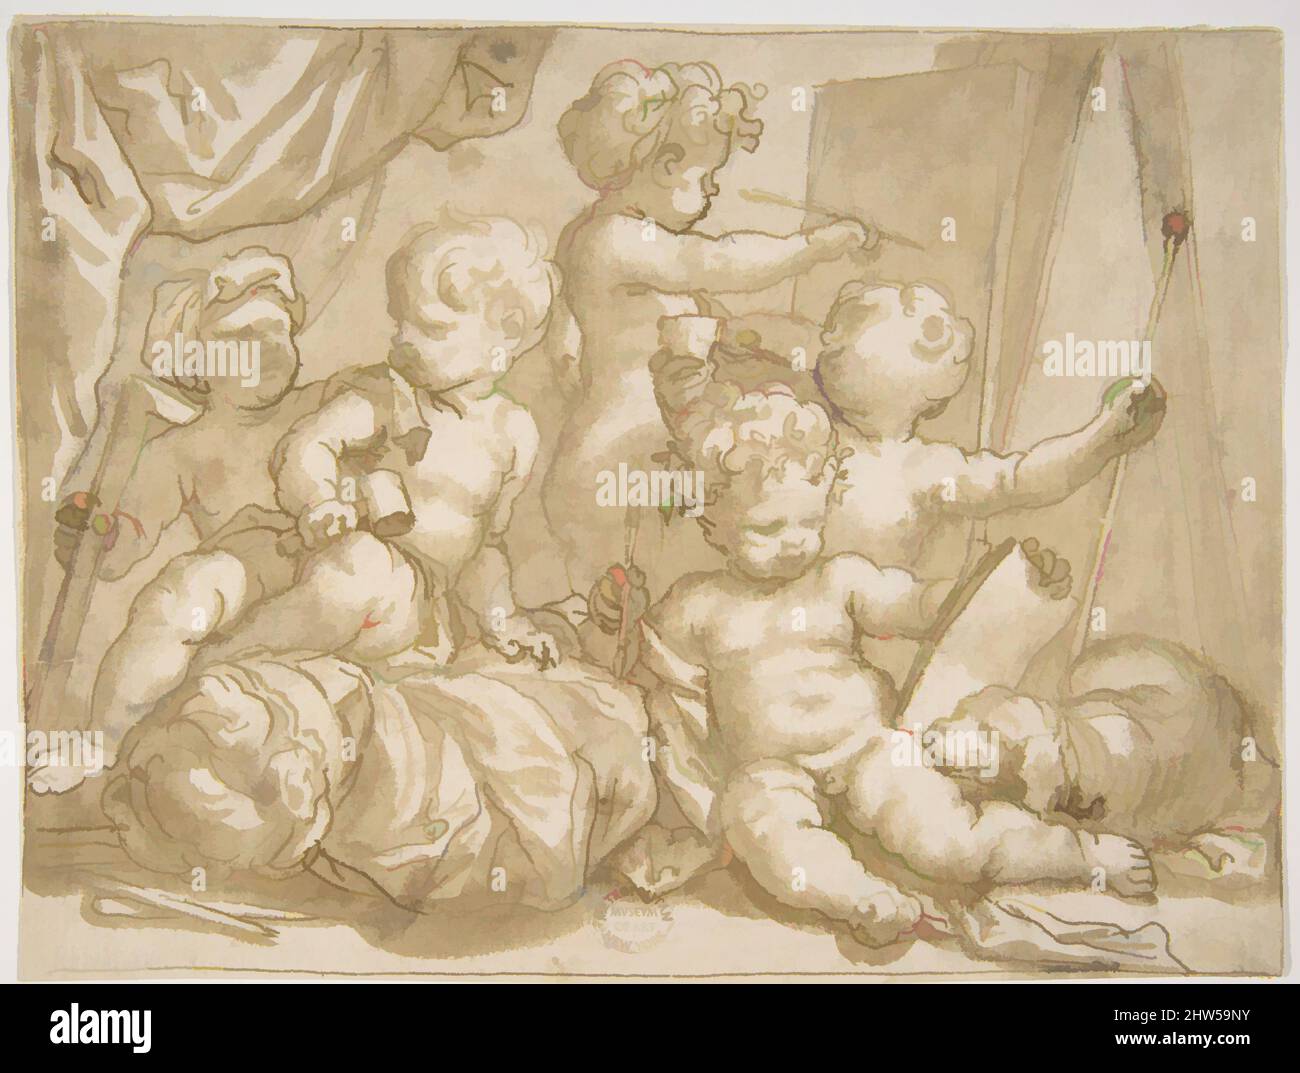 Art inspired by Putti with the Attributes of the Arts, 1627–1703, Pen and brown ink, brush and brown wash over some charcoal, 5 9/16 x 7 3/8in. (14.2 x 18.8cm), Drawings, Domenico Piola (Italian, Genoa 1627–1703 Genoa, Classic works modernized by Artotop with a splash of modernity. Shapes, color and value, eye-catching visual impact on art. Emotions through freedom of artworks in a contemporary way. A timeless message pursuing a wildly creative new direction. Artists turning to the digital medium and creating the Artotop NFT Stock Photo